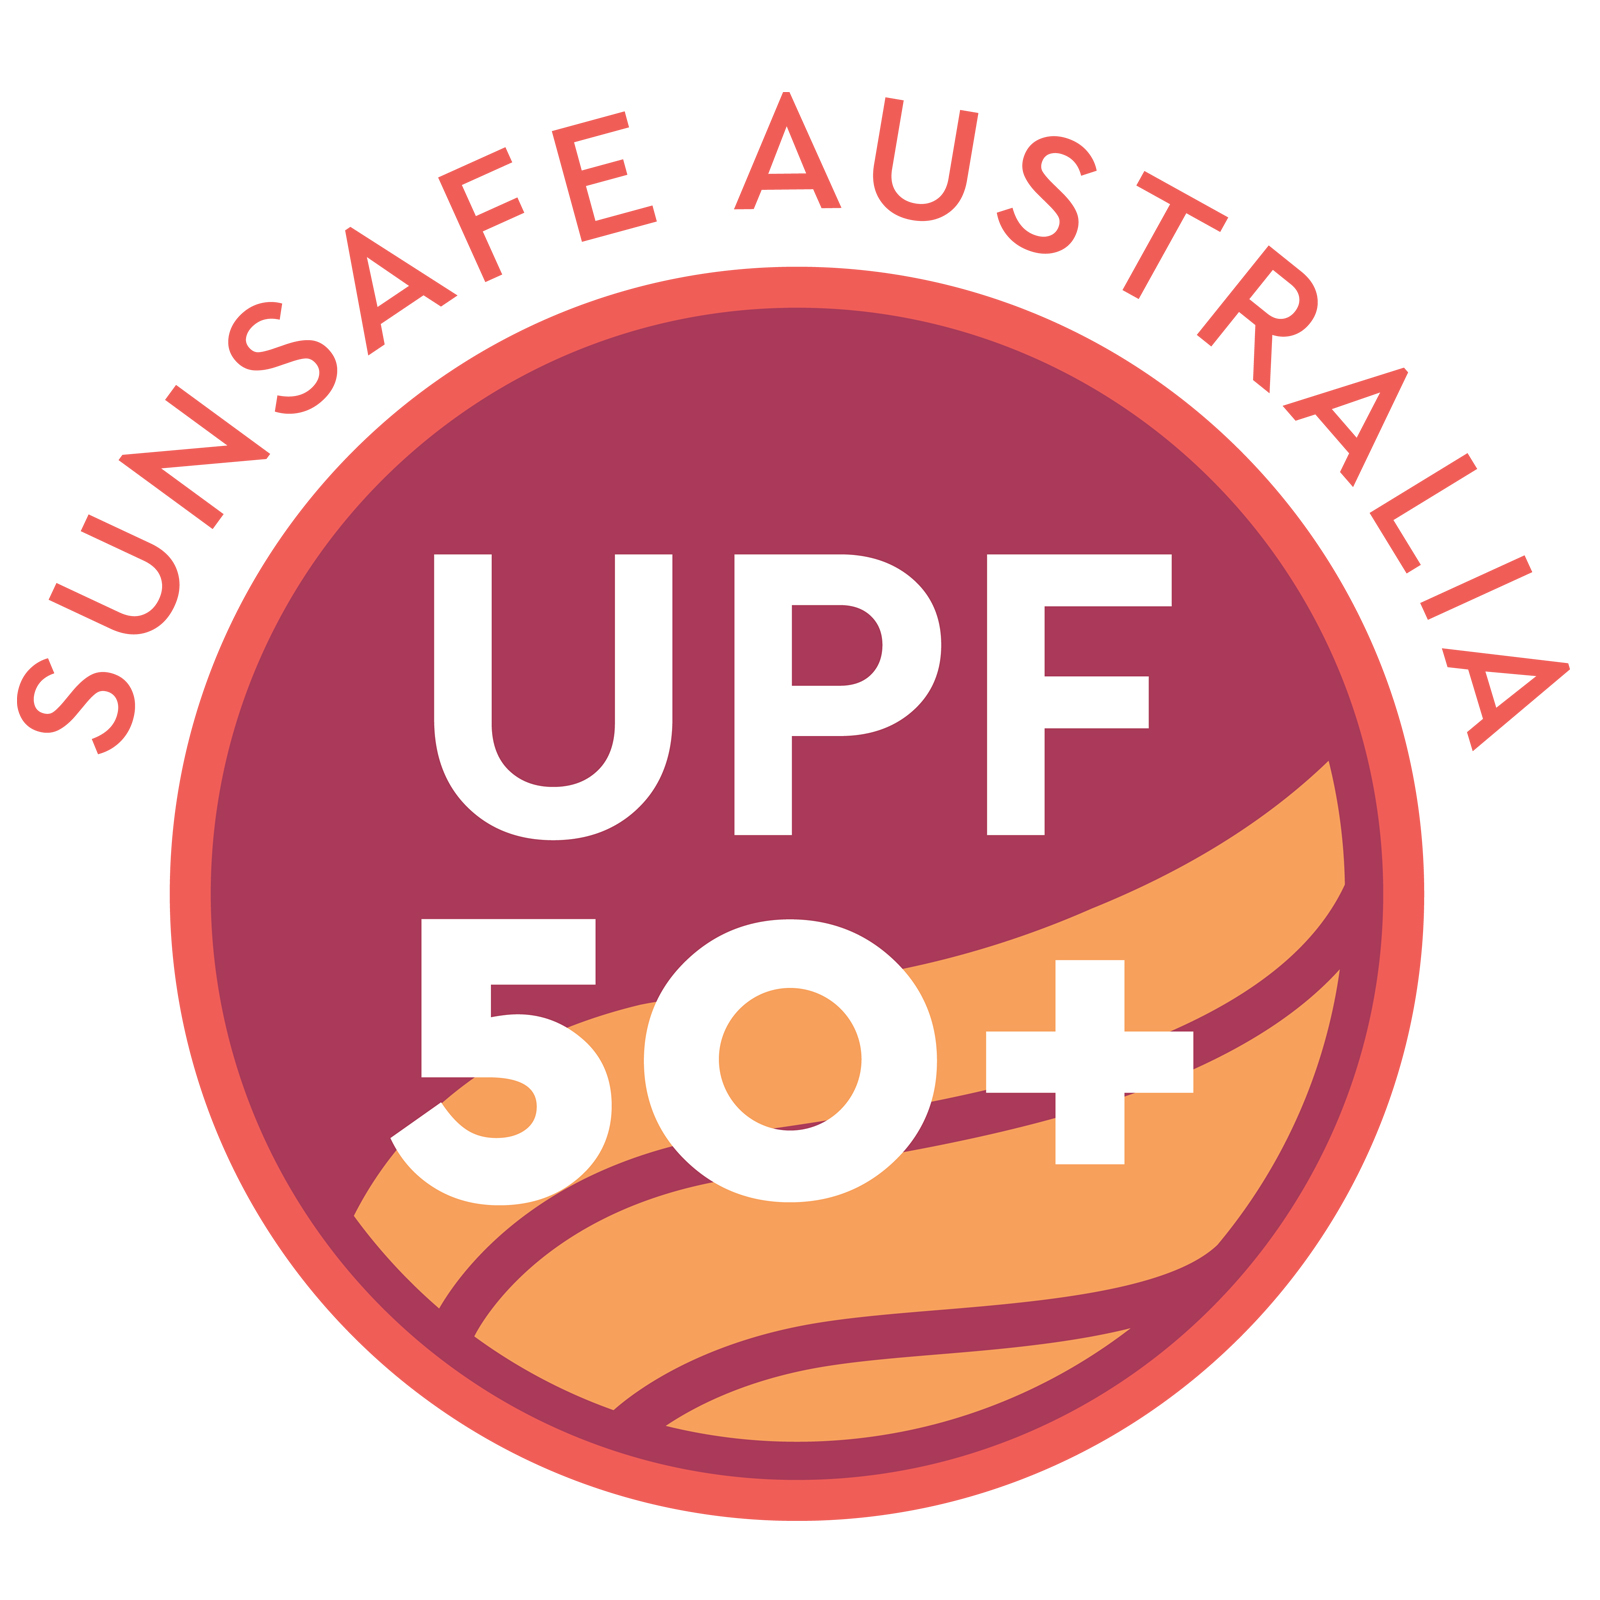 What is UPF 50+?